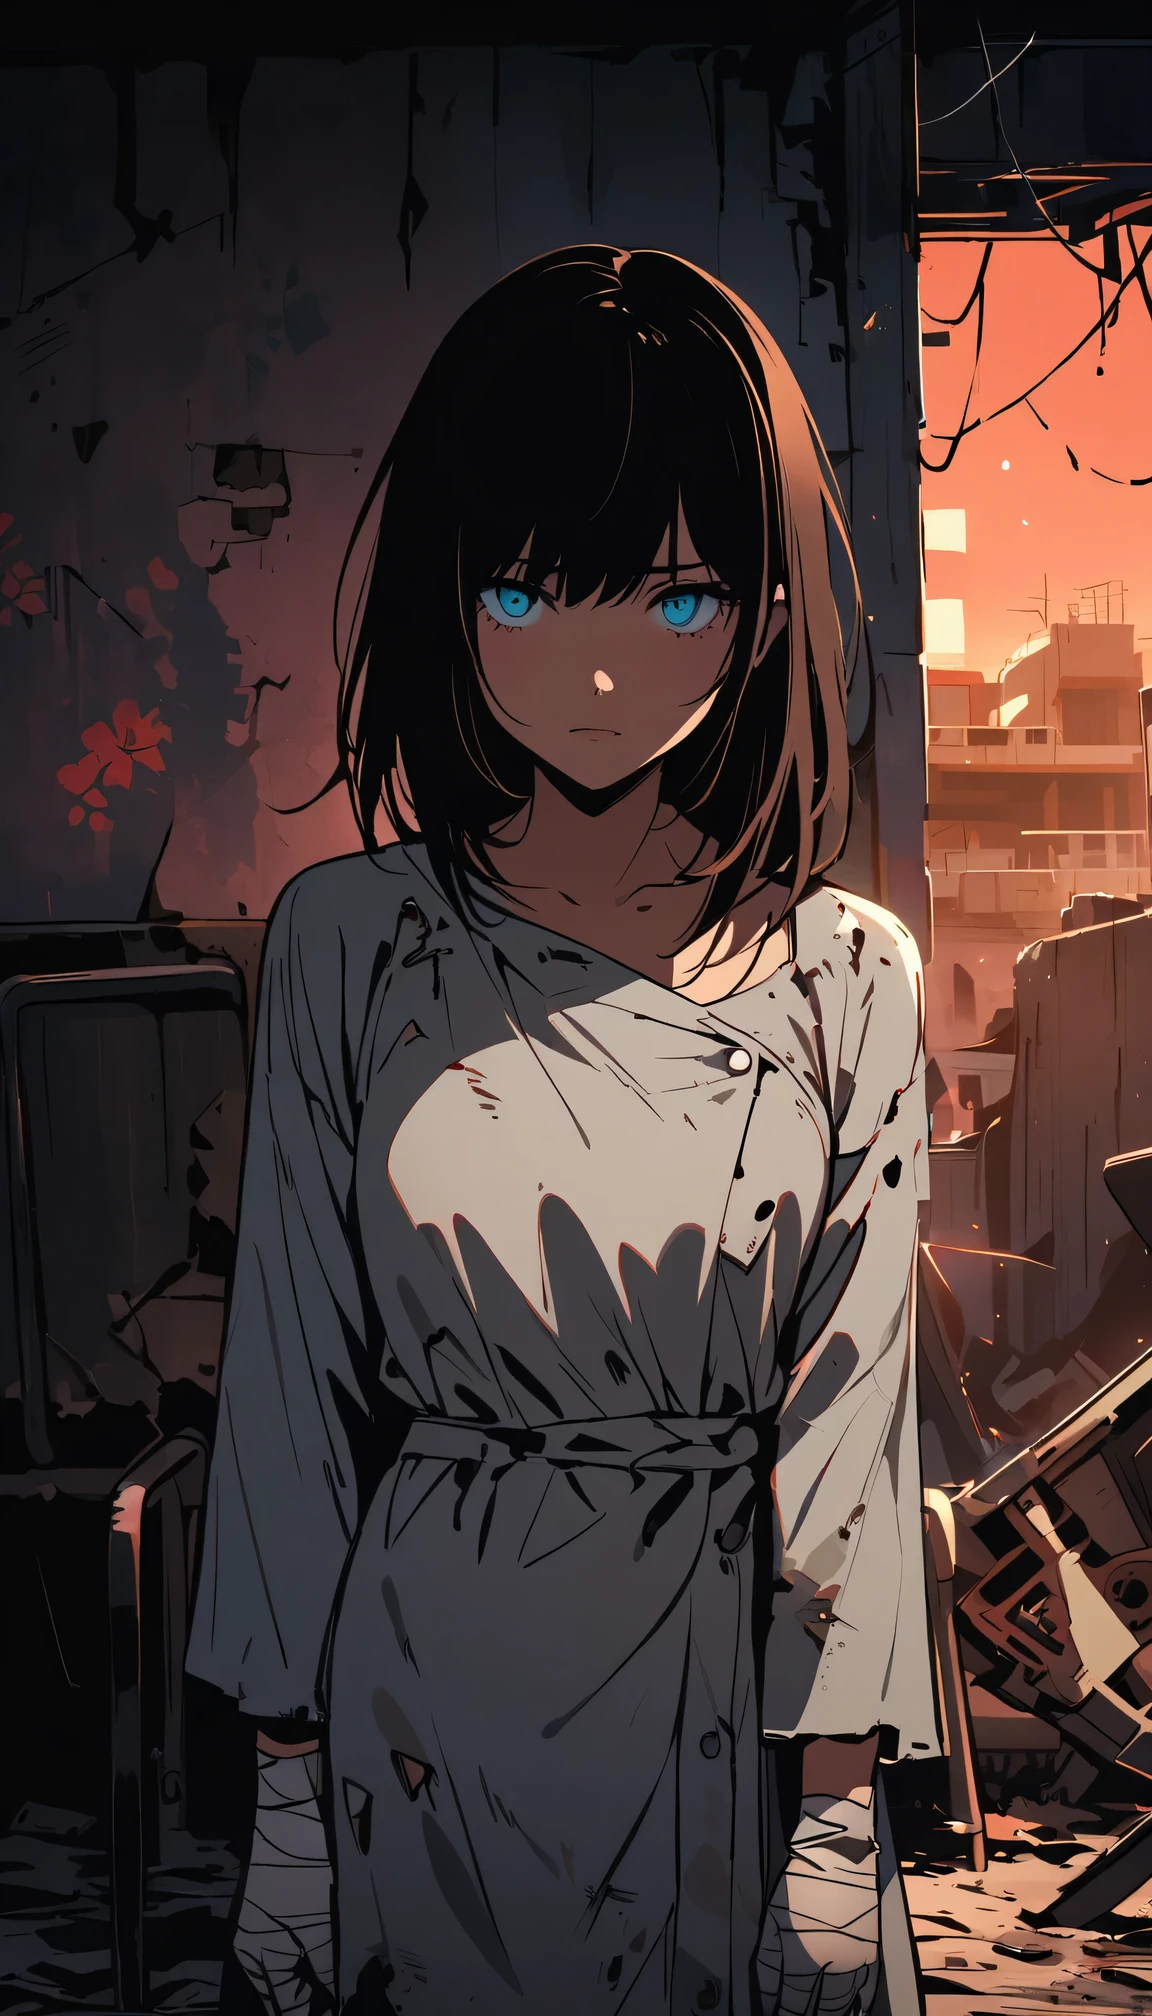 dark - comic-style:post-apocalyptic wasteland,desolate hospital,barren landscape,dusty atmosphere,overgrown with weeds,ruined buildings,crumbling walls,A girl wearing worn-out nurse uniform who was injured,a stretcher,abandoned medical equipment,flickering dim lights,shattered windows,faint sunlight peeking through the cracks,silence interrupted by distant echoes,decaying furniture and belongings,mysterious medical experiments,hauntingly beautiful,empty corridors and hallways,dirty bandages,makeshift bandages,muted colors,ominous clouds in the sky,ruined cityscape in the background,hope in her eyes,scattered papers and documents,decipherable symbols on the walls,evocative art style,contrast between destruction and resilience,heart-wrenching story hidden within the scene